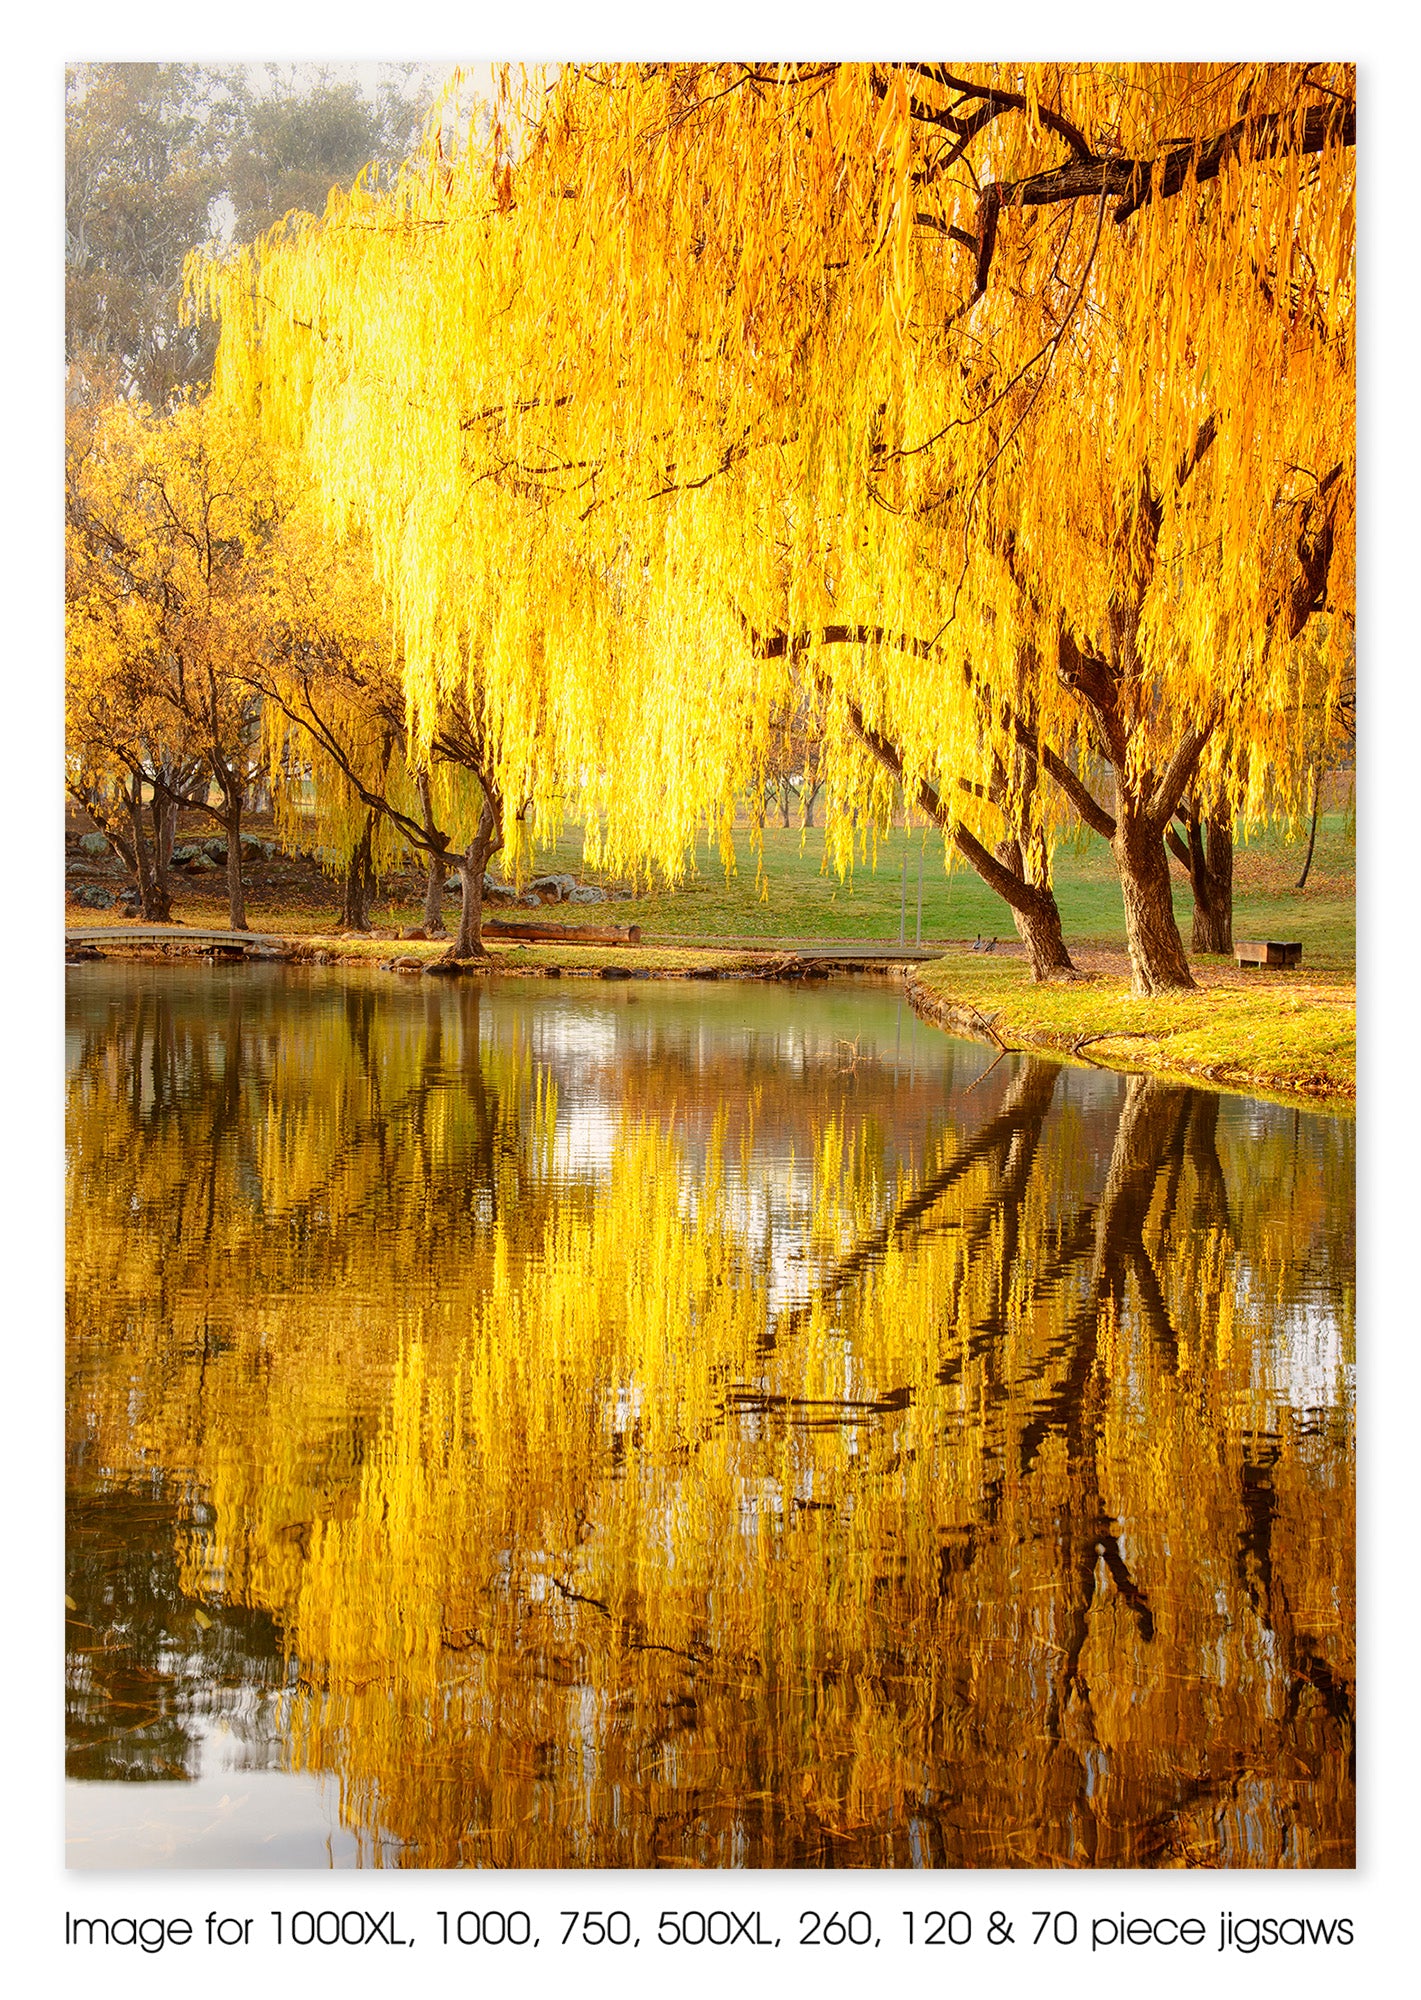 Reflection Pool - Weston Park, Canberra ACT